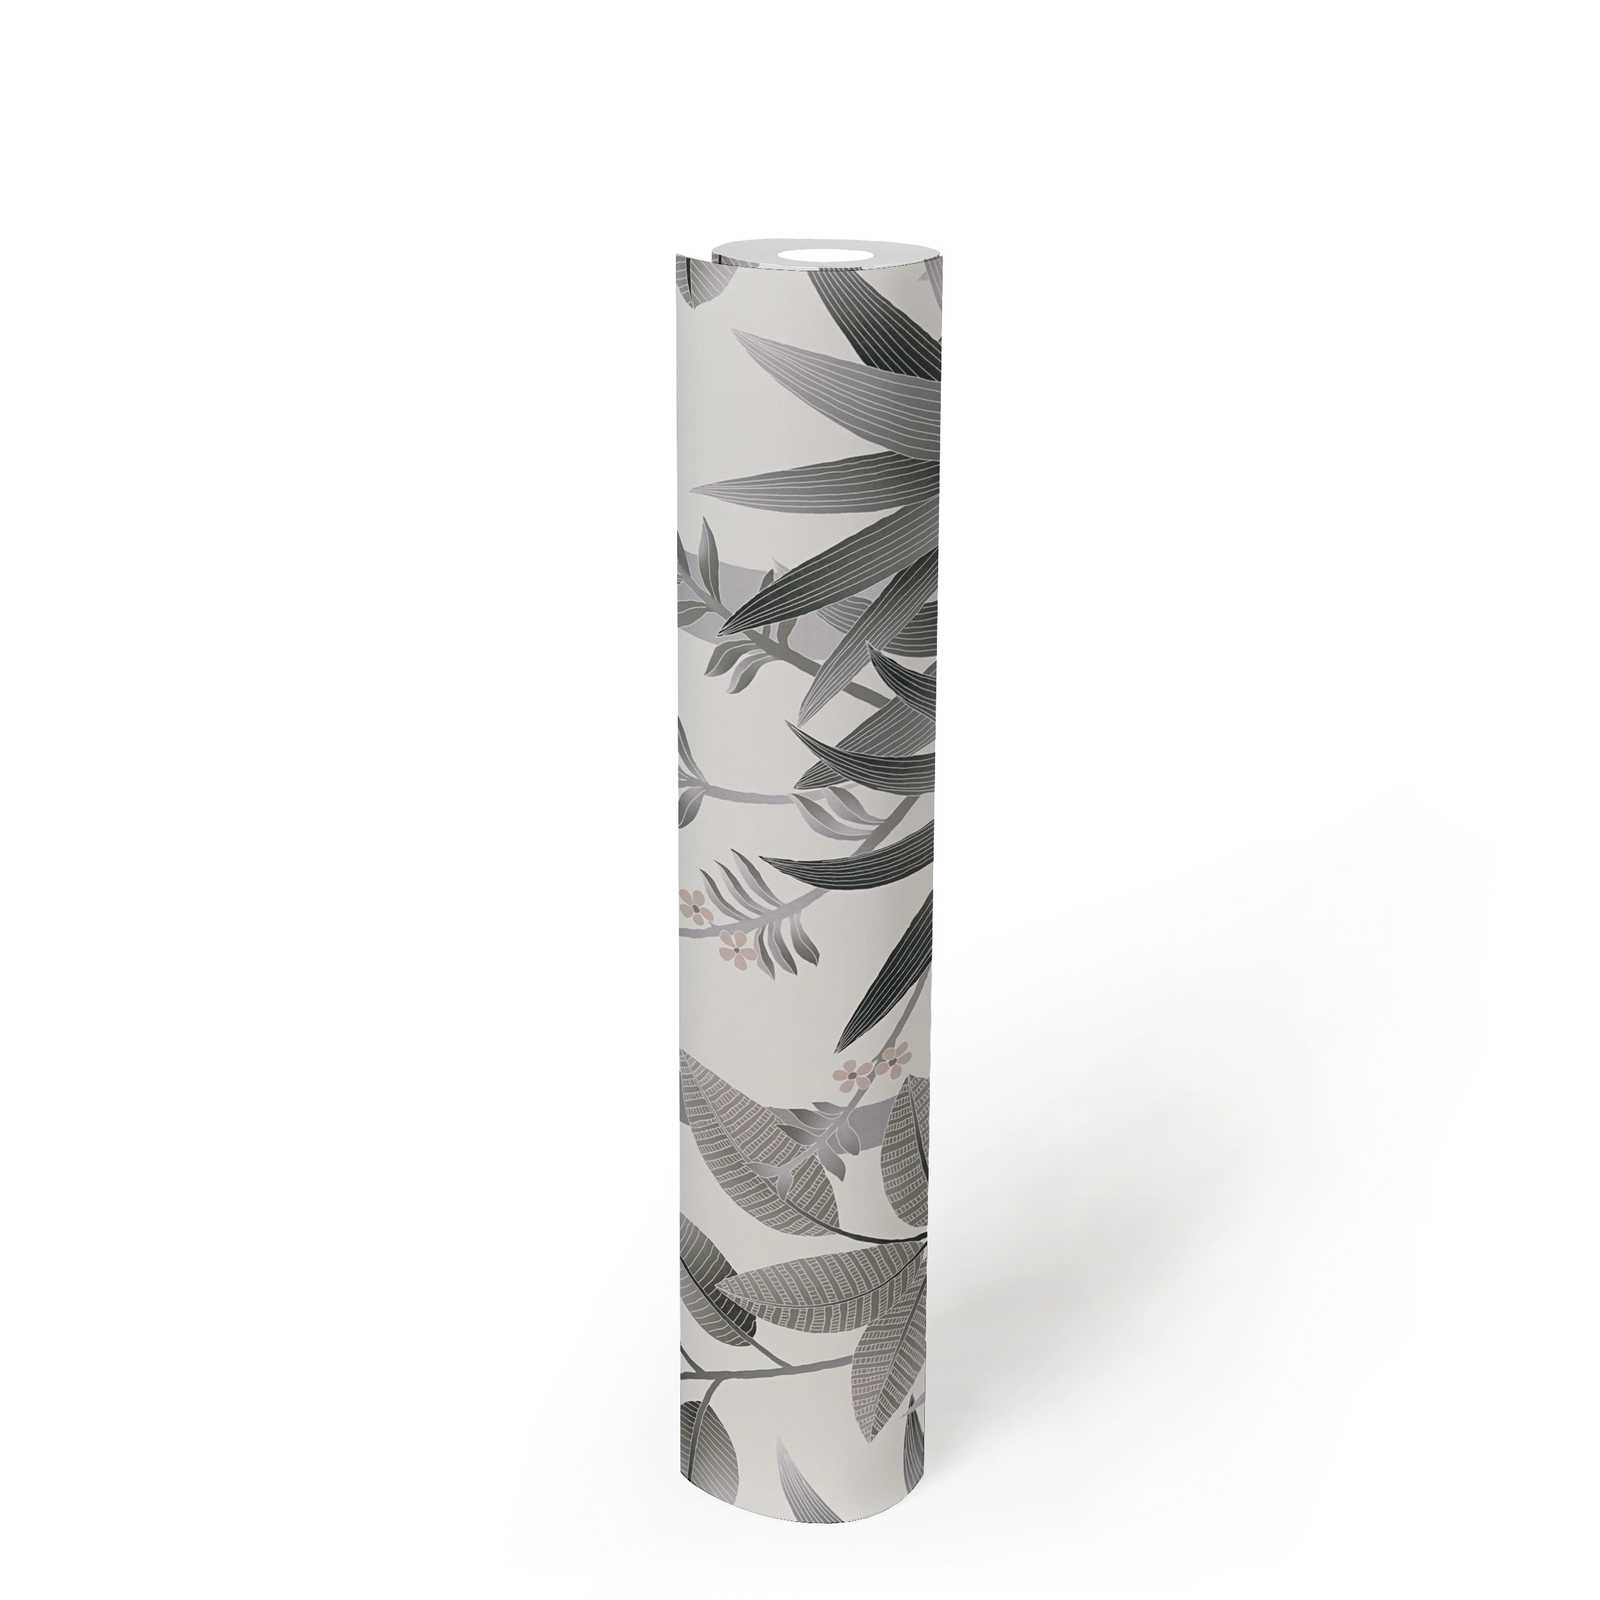             Floral non-woven wallpaper with leaf pattern - grey, black, white
        